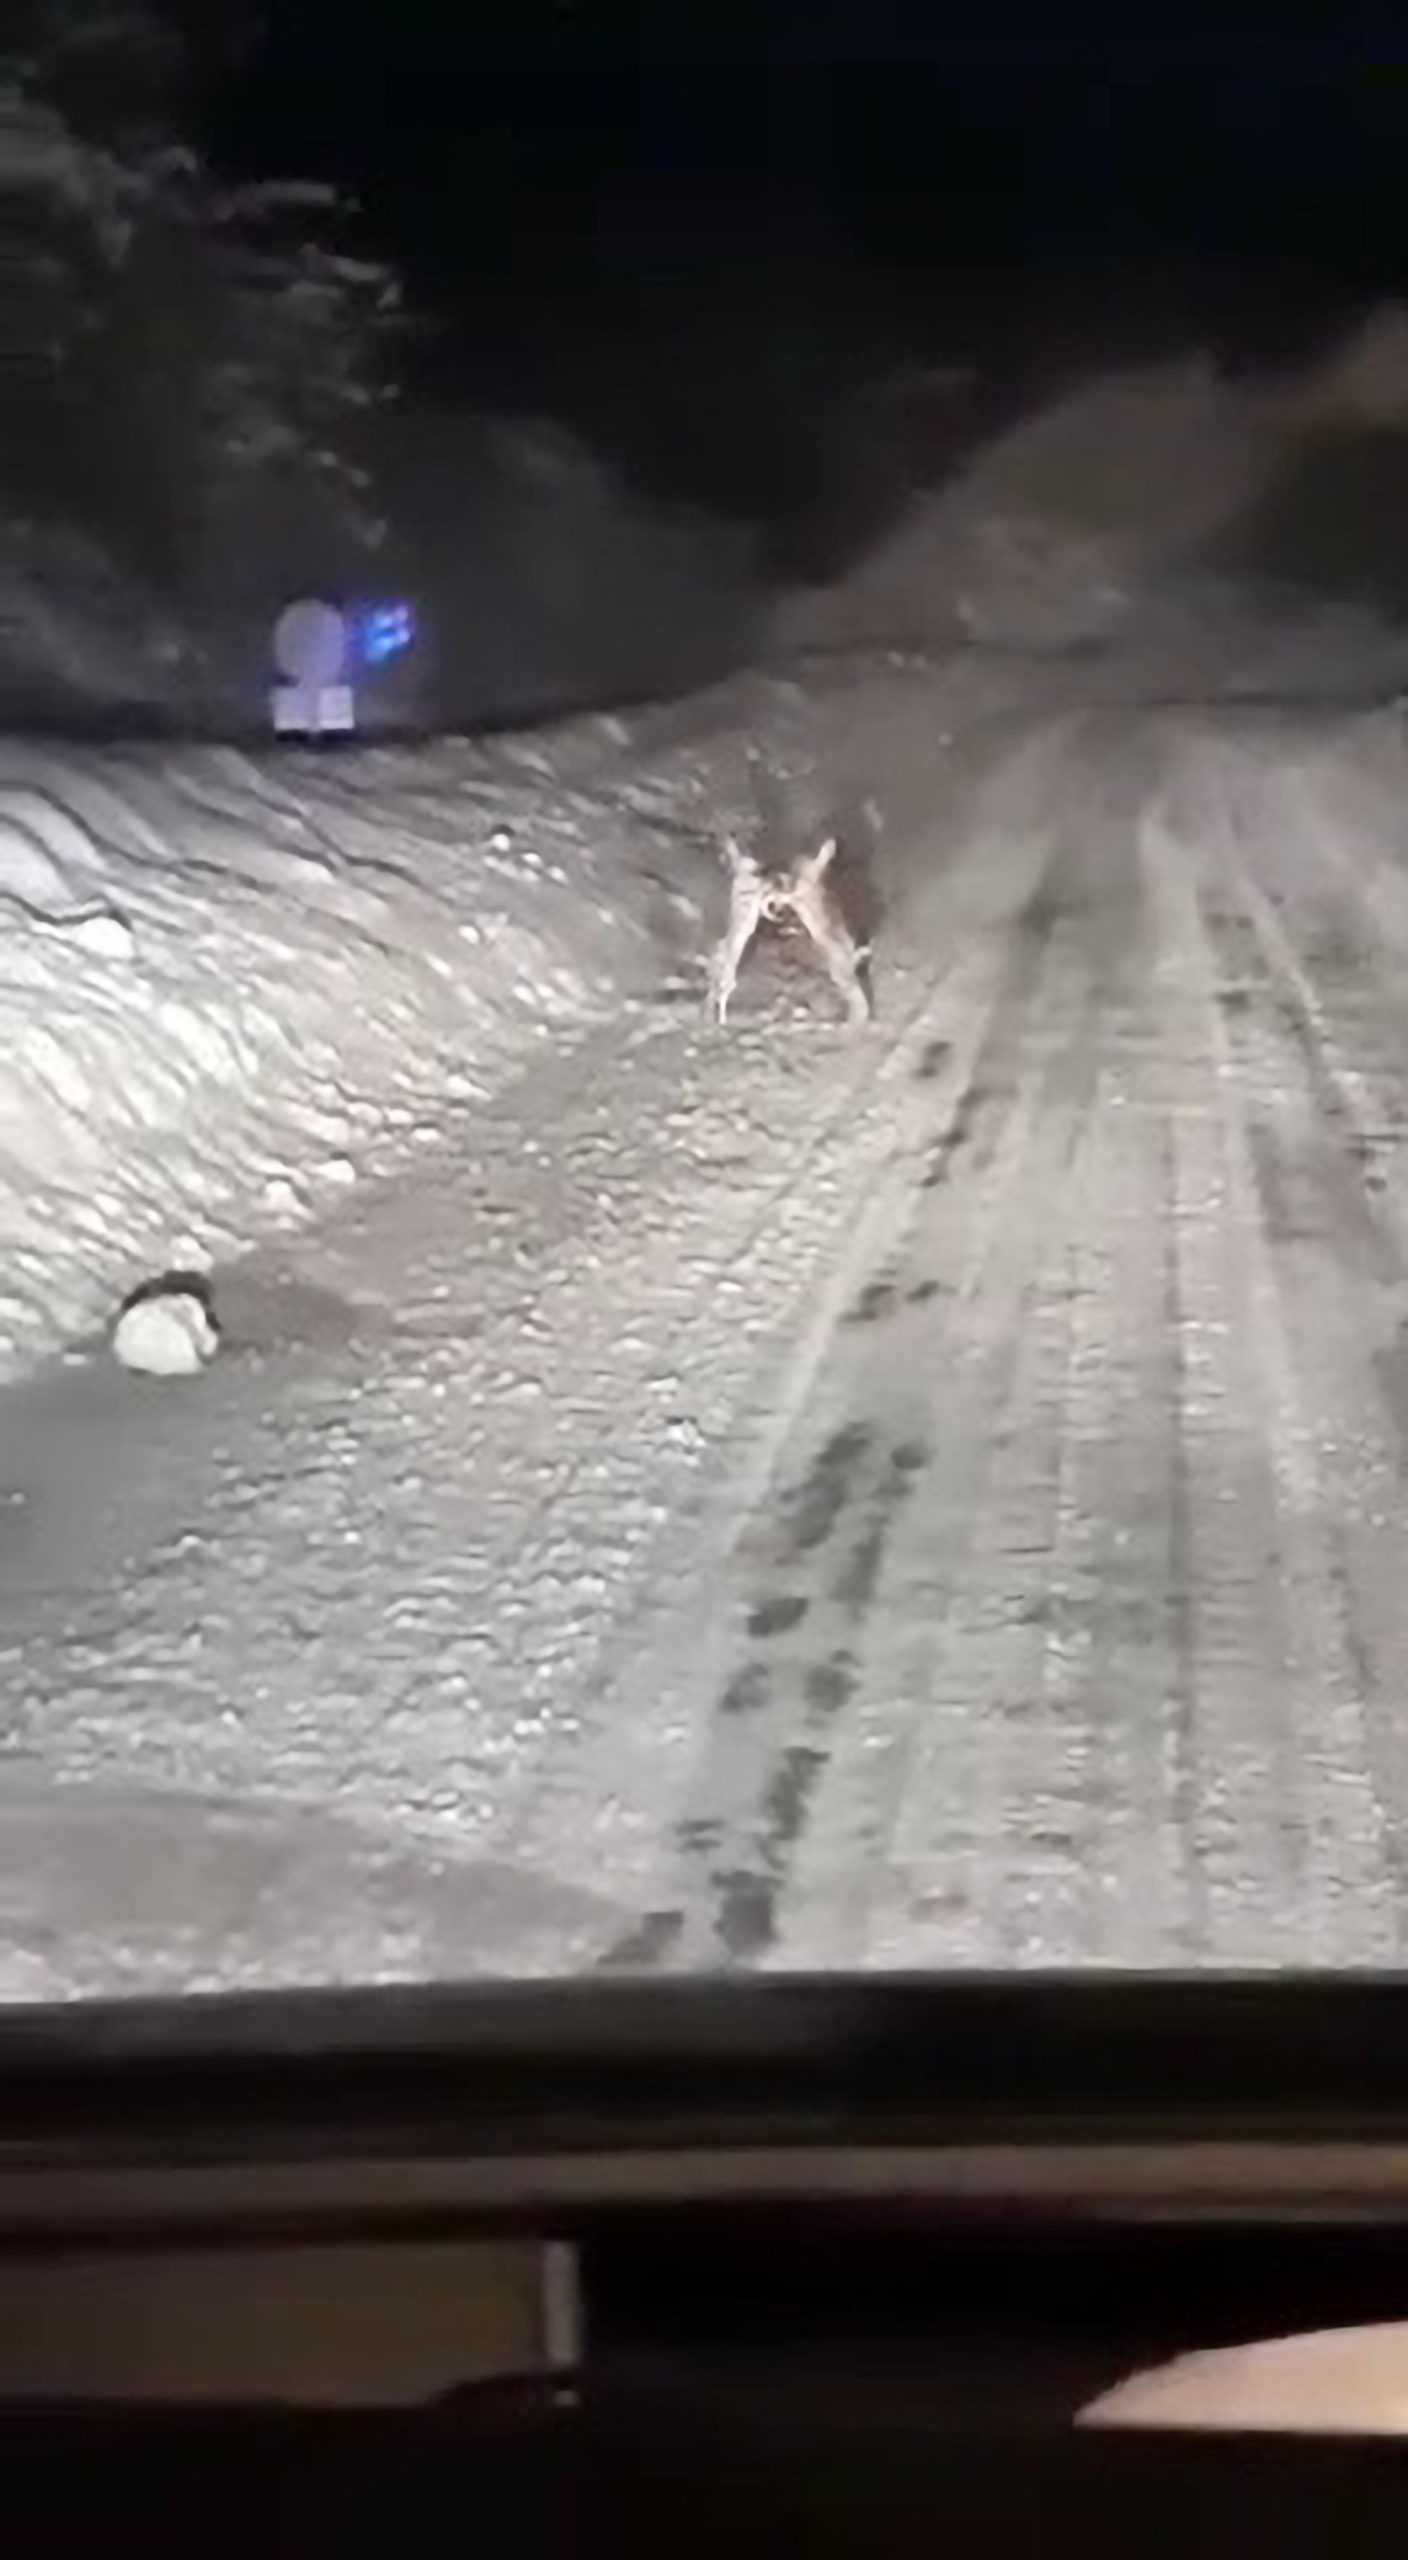 Read more about the article Motorist Films Two Rowdy Rabbits Slugging It Out On Icy Road In Minus 15 Degrees